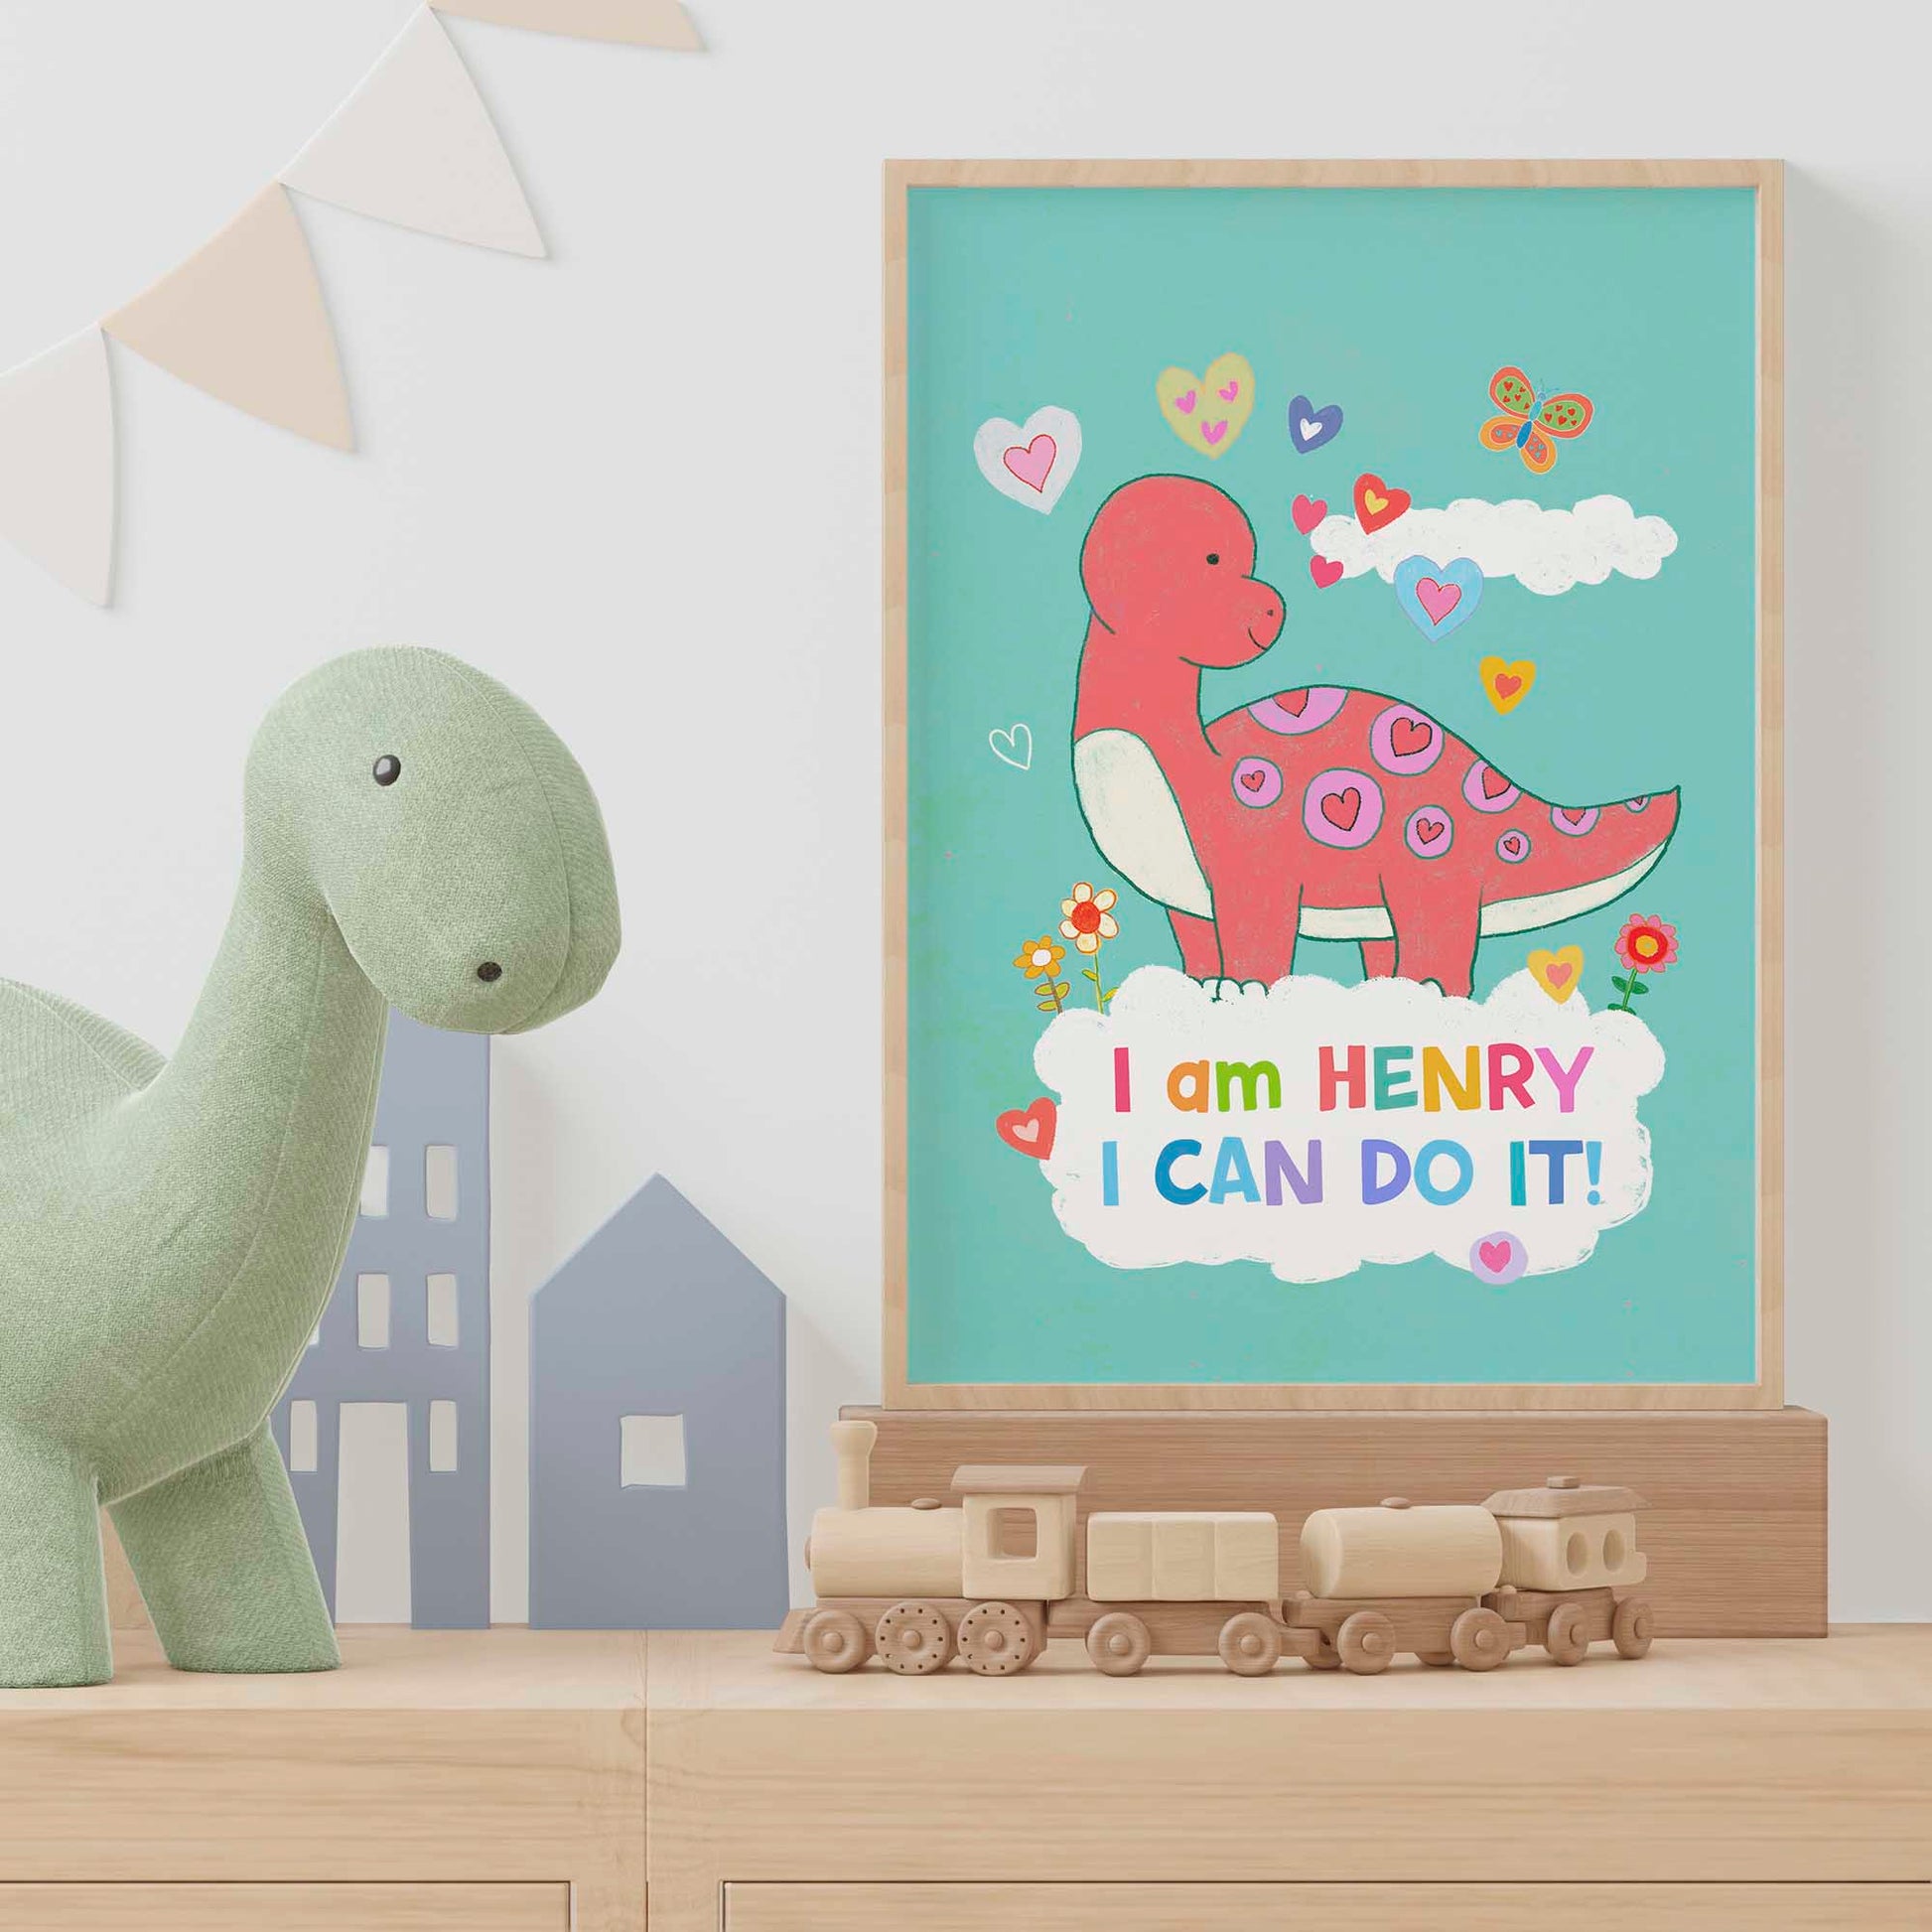 Nursery wall art with a dynamic dinosaur theme, designed to inspire and decorate with adventure.